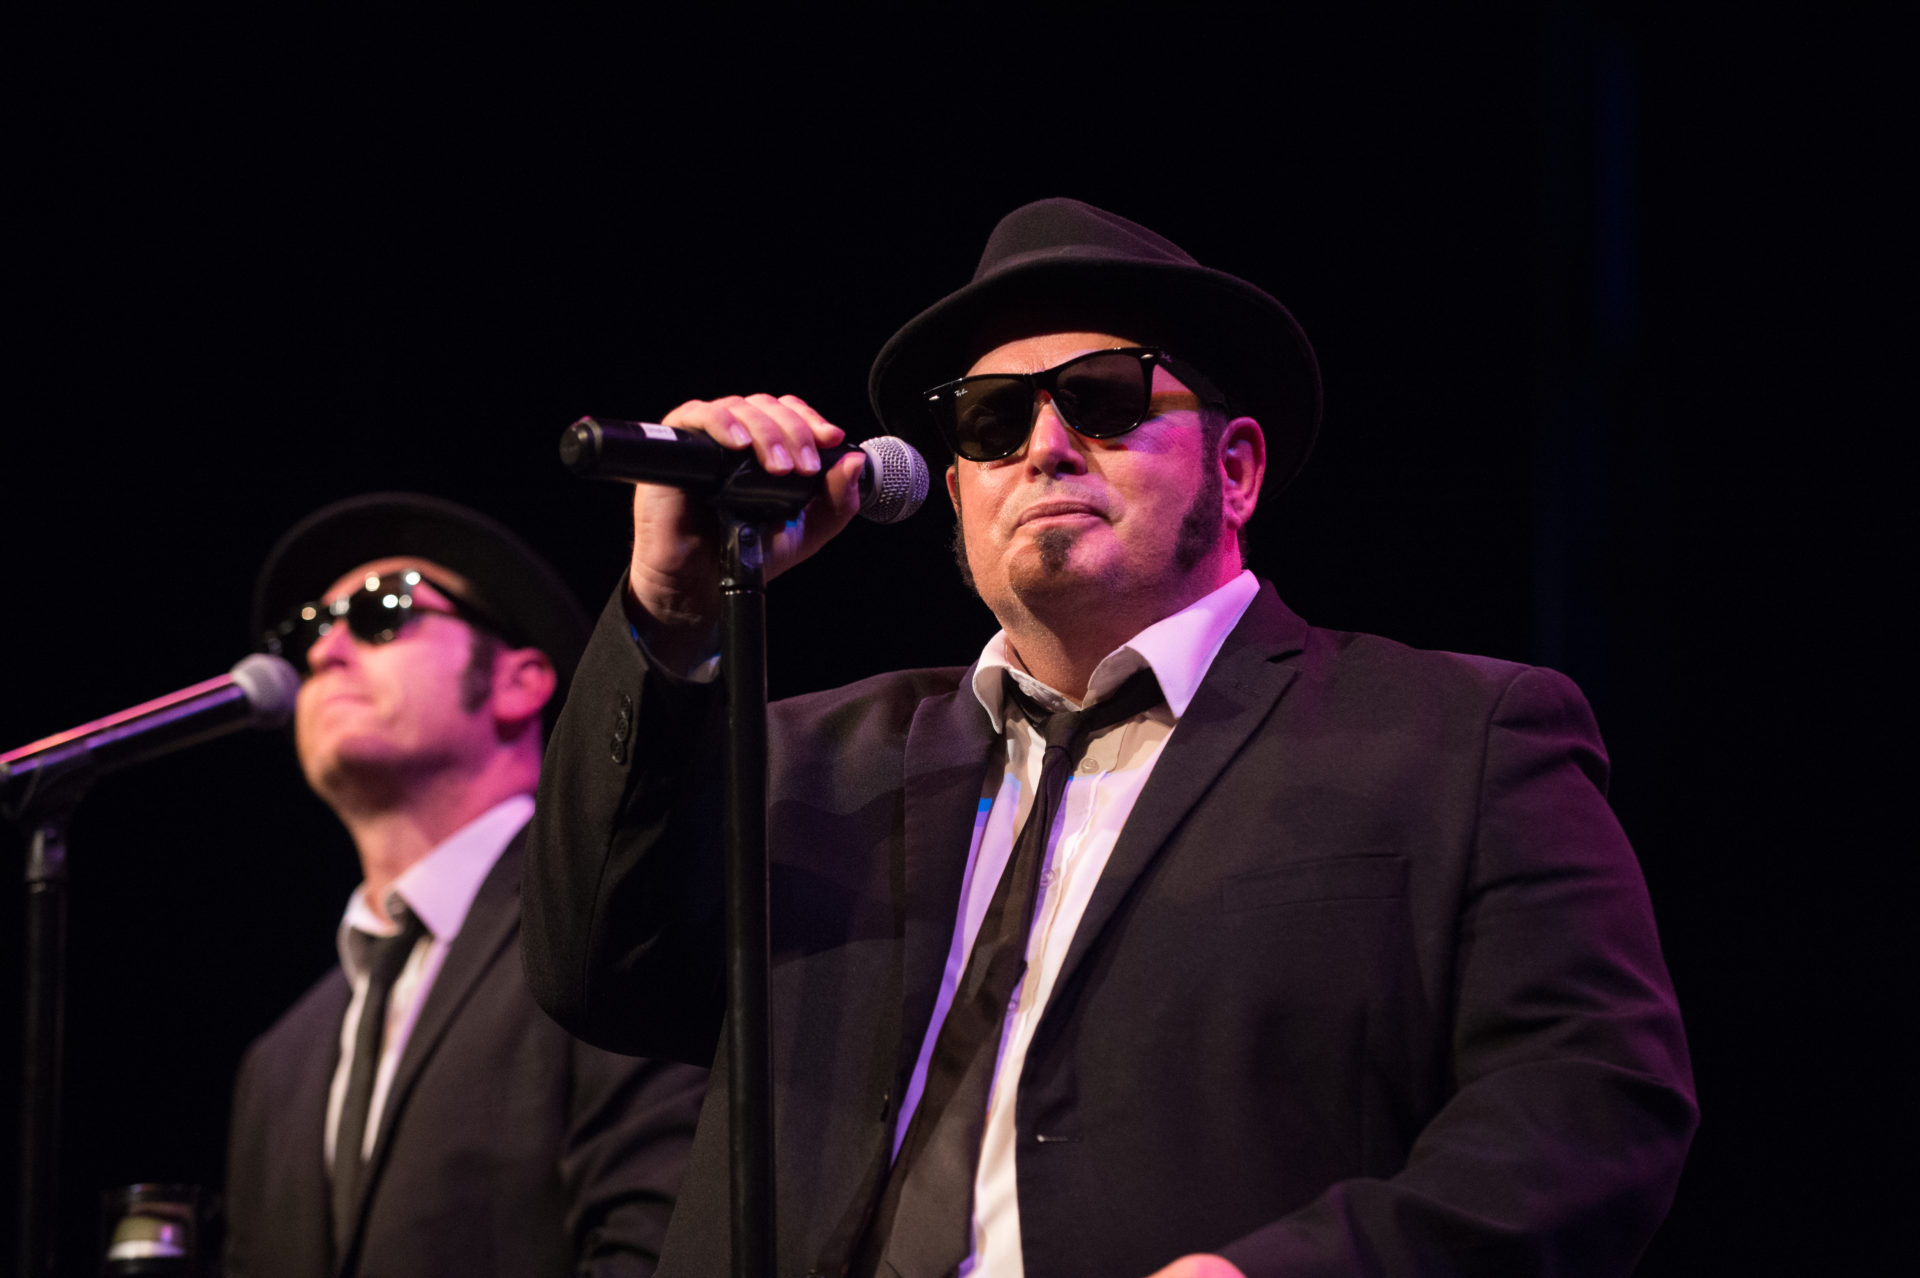 Chicago Blues Brothers at The Savoy Theatre for one night only ...